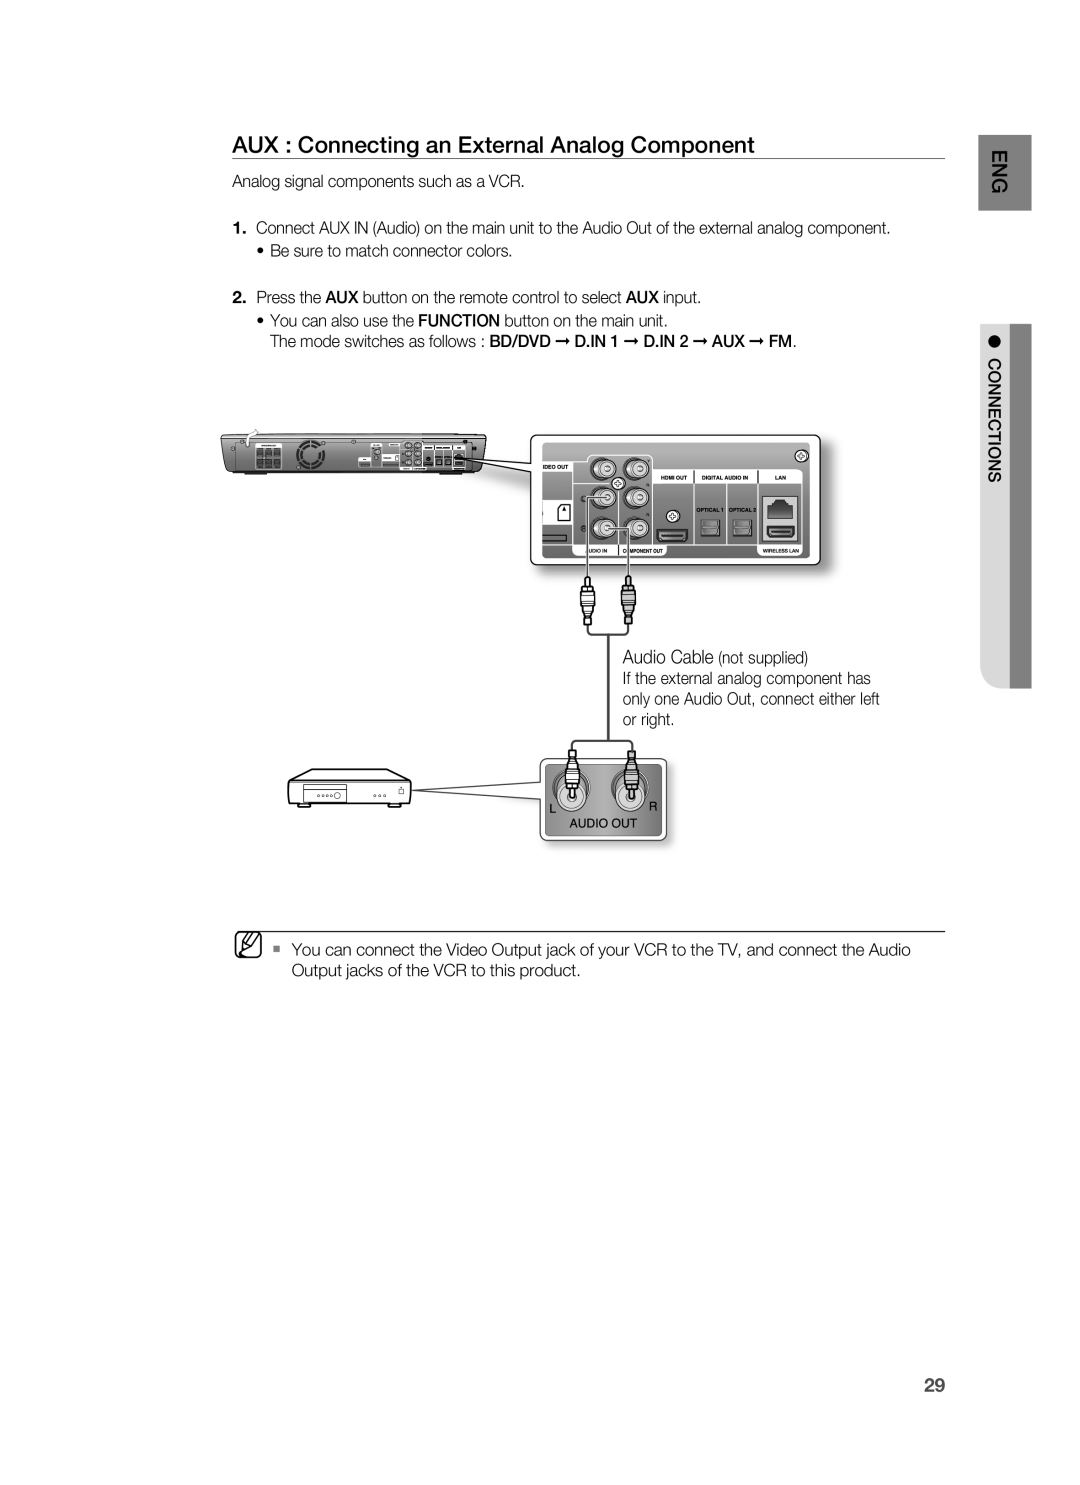 Samsung HT-BD1200, AH68-02178Z user manual AUX Connecting an External Analog Component 